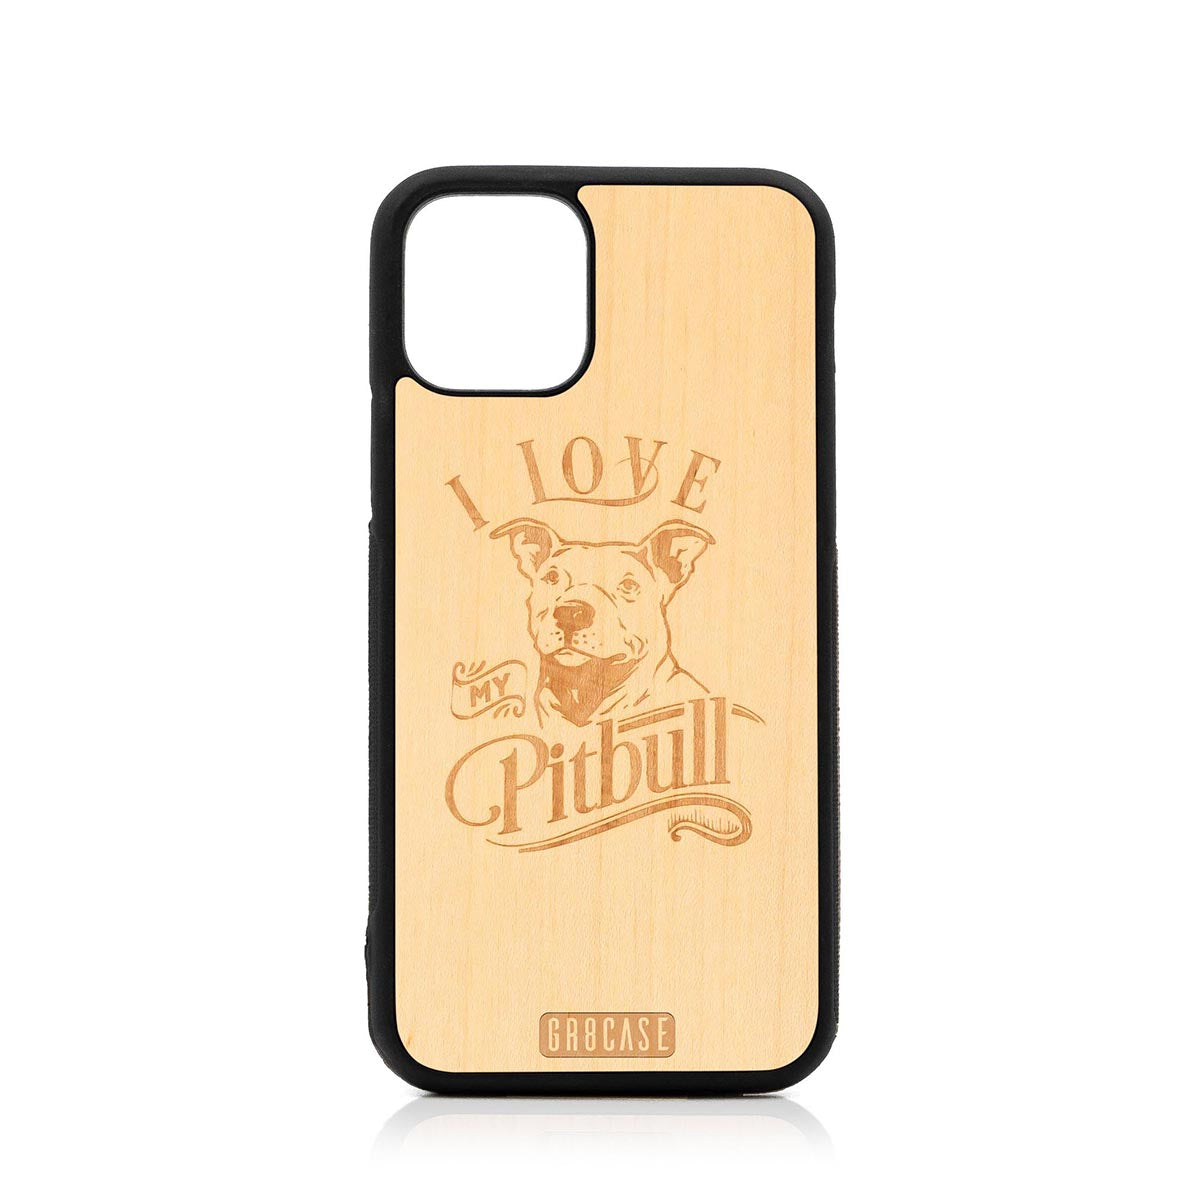 I Love My Pitbull Design Wood Case For iPhone 11 Pro by GR8CASE